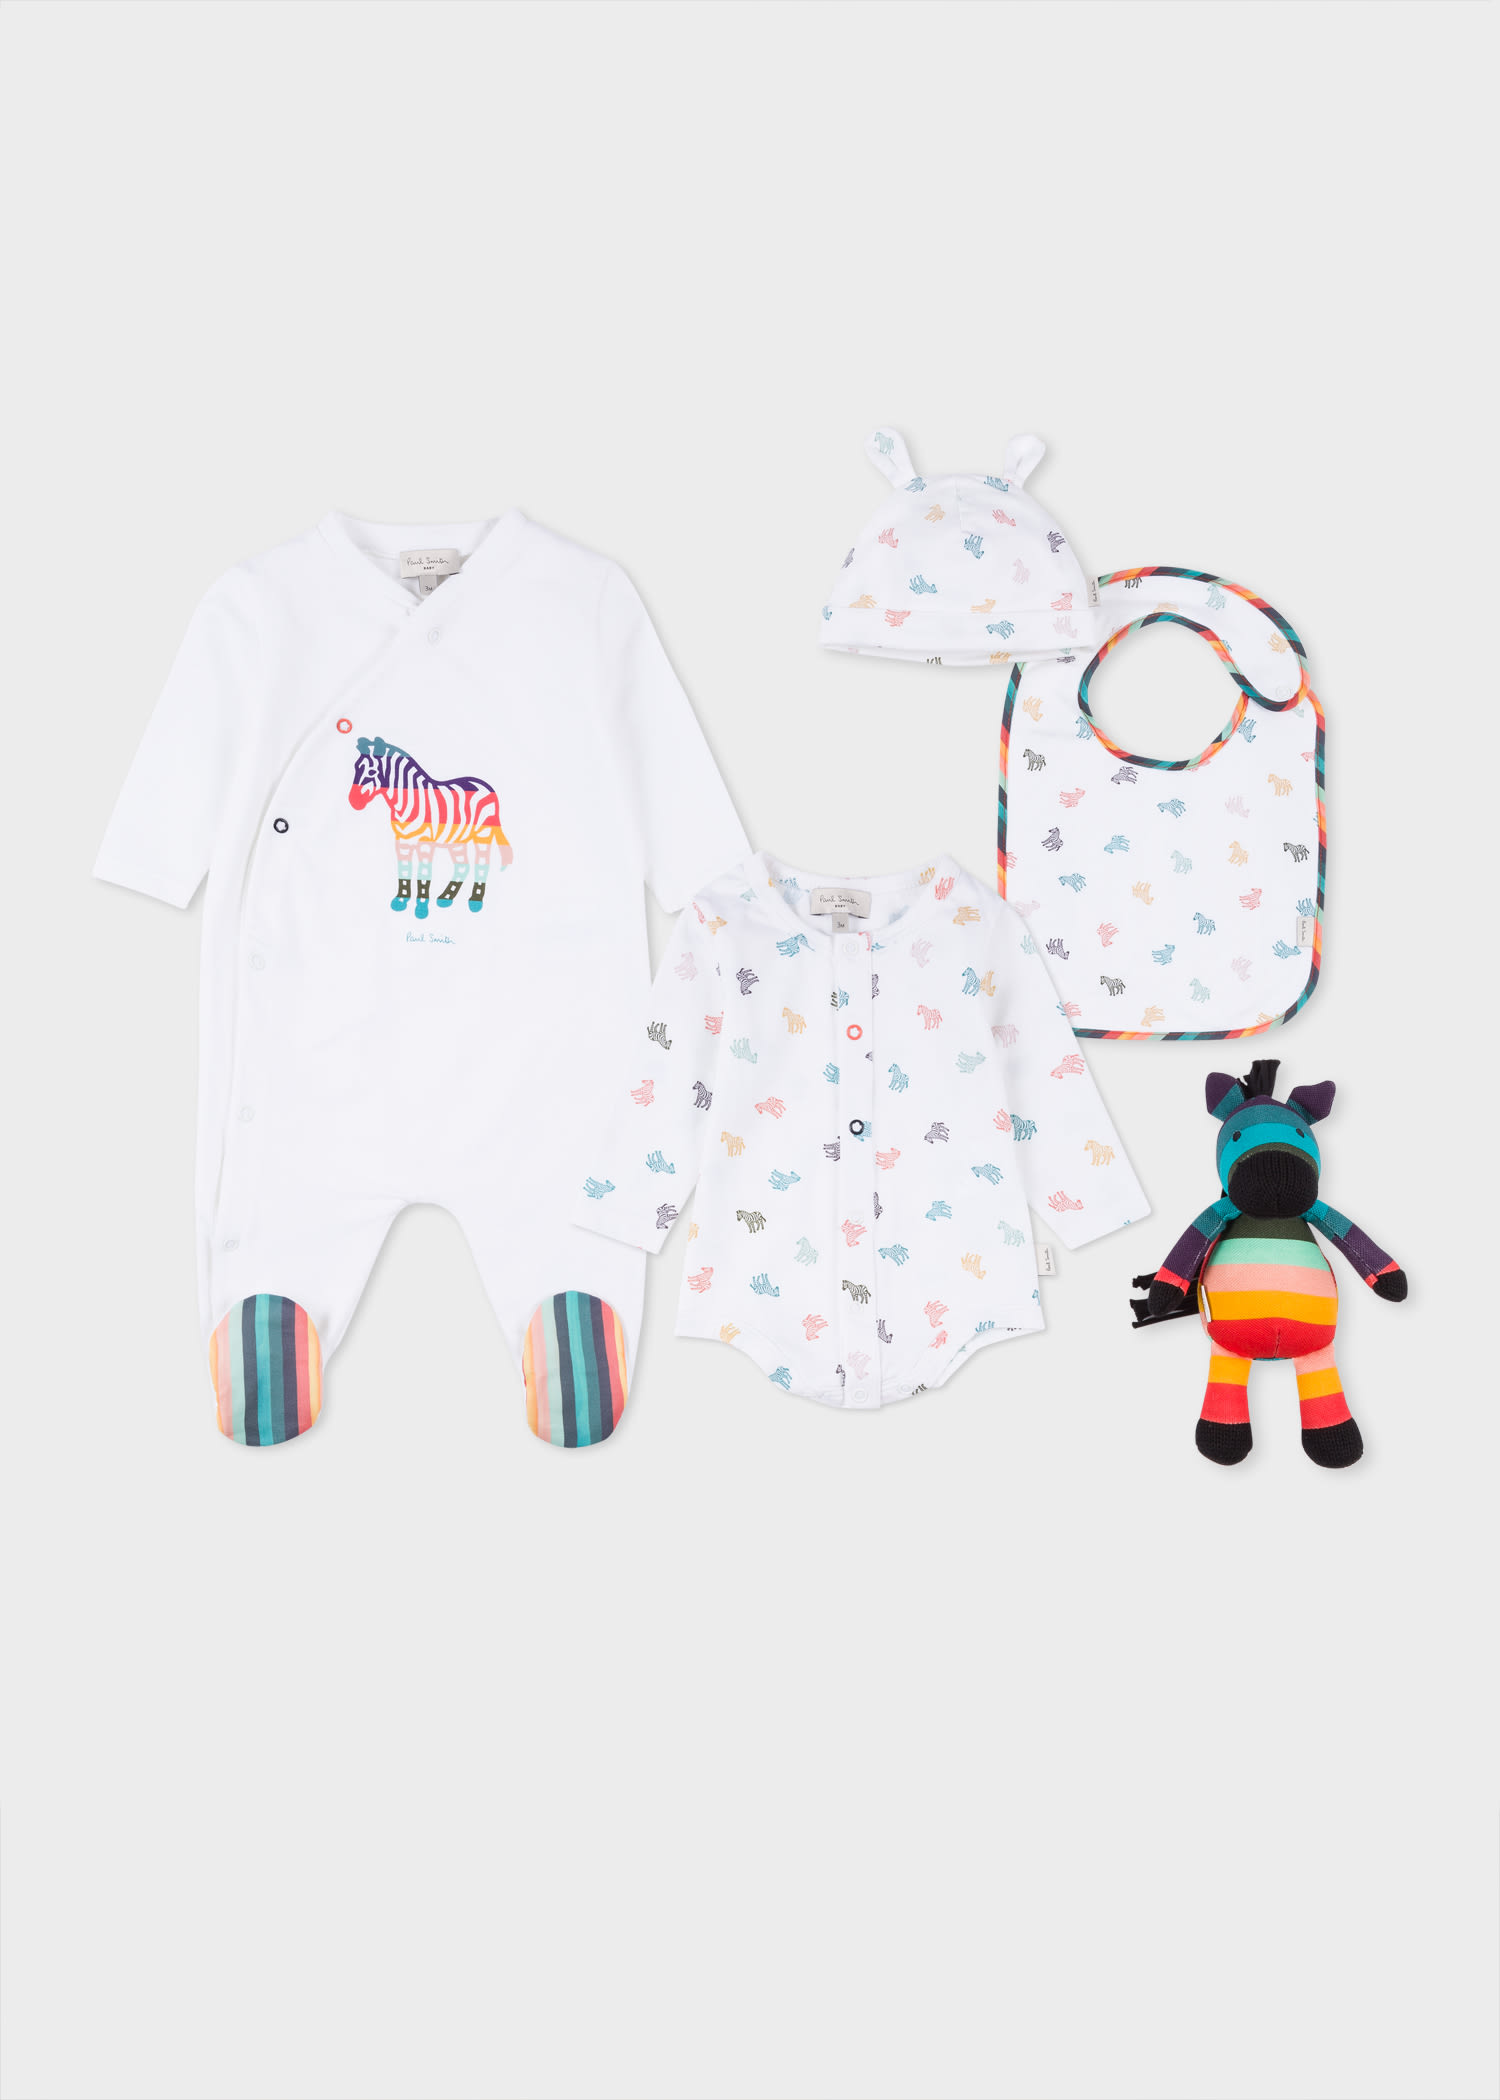 Harden retort Rise Babies' Playwear and Toy Box Set - Paul Smith Asia